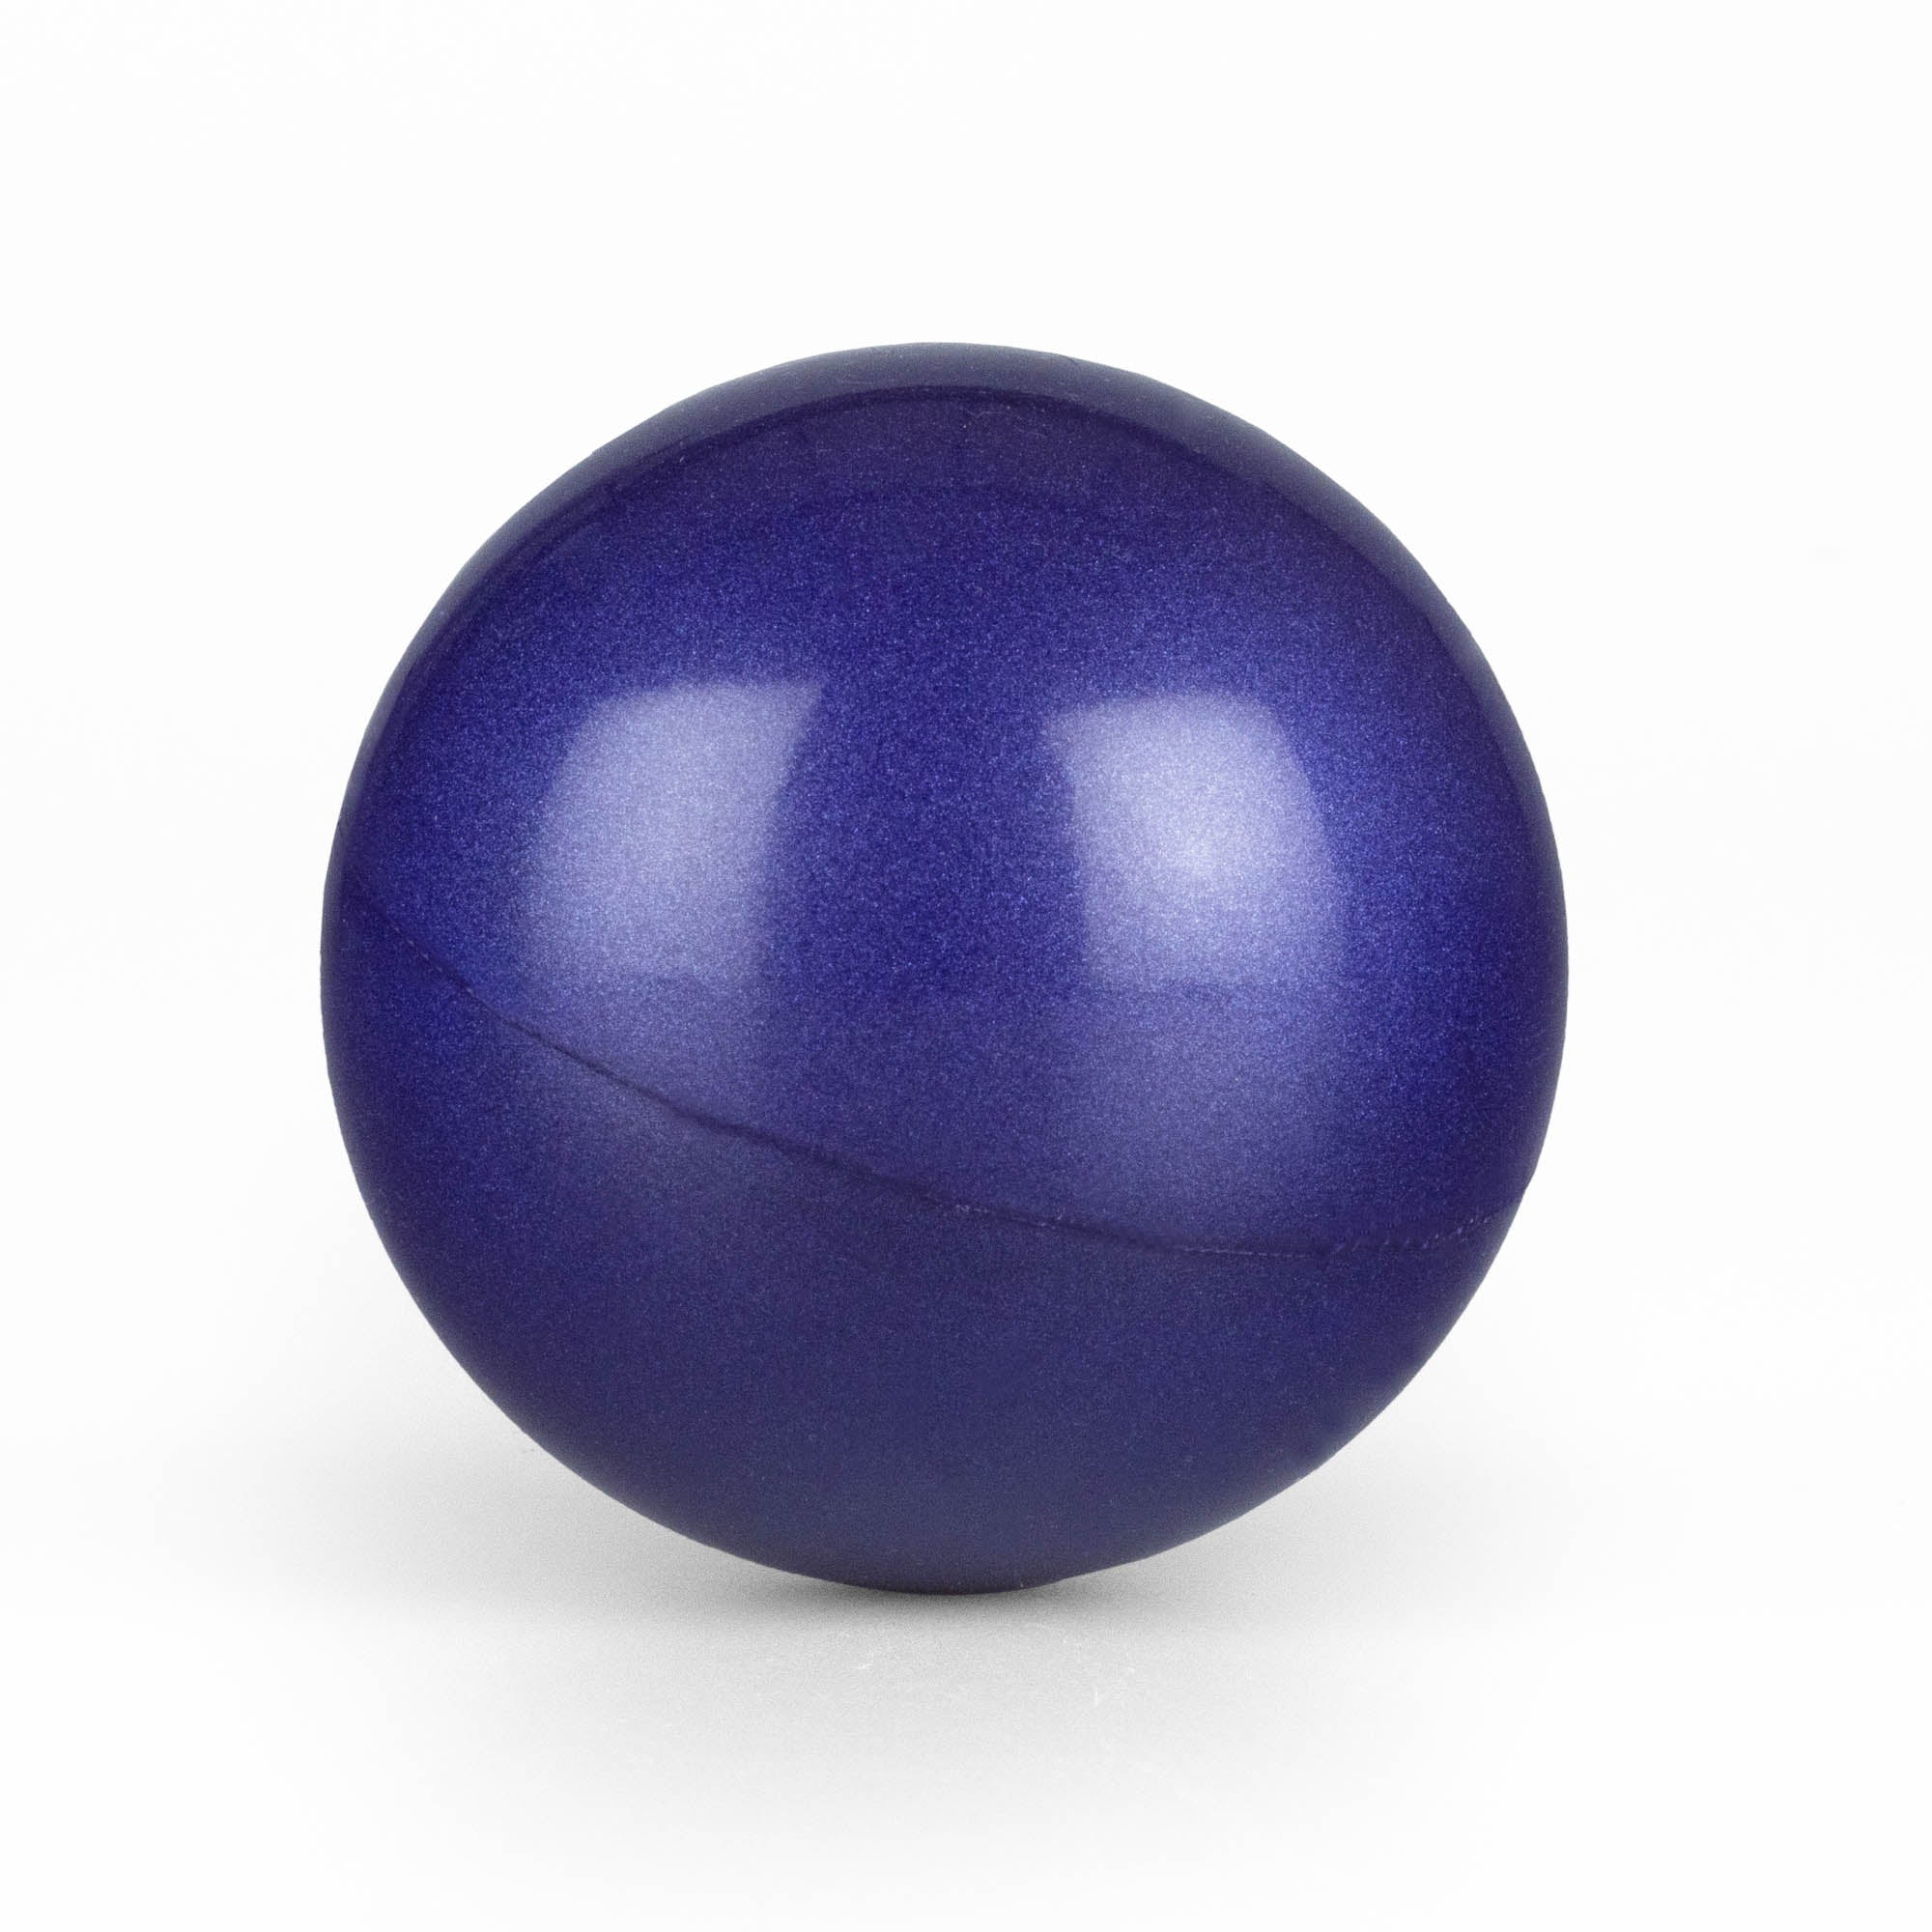 Mr babache stage ball 72mm in purple